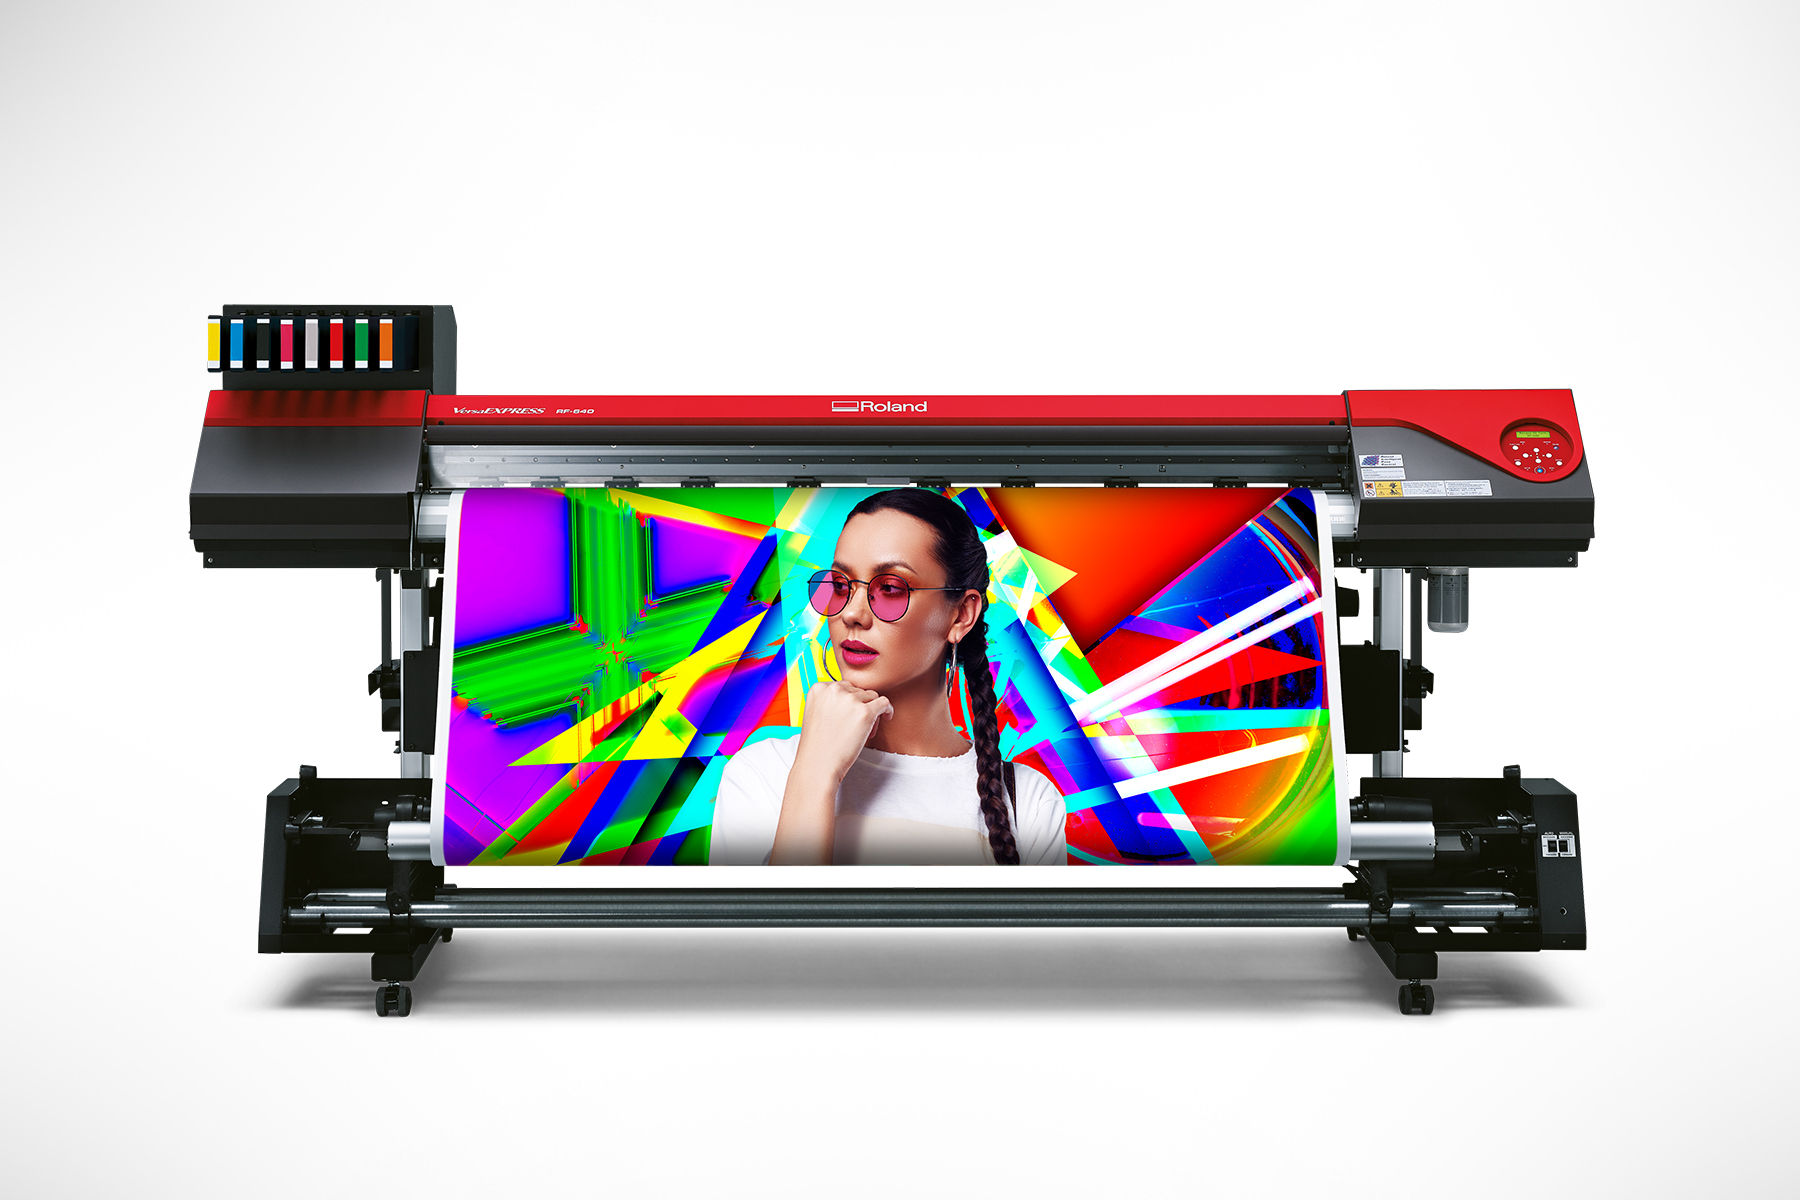 The new Roland VersaEXPRESS RF-640 8-Color printer boasts the widest color gamut in its class.